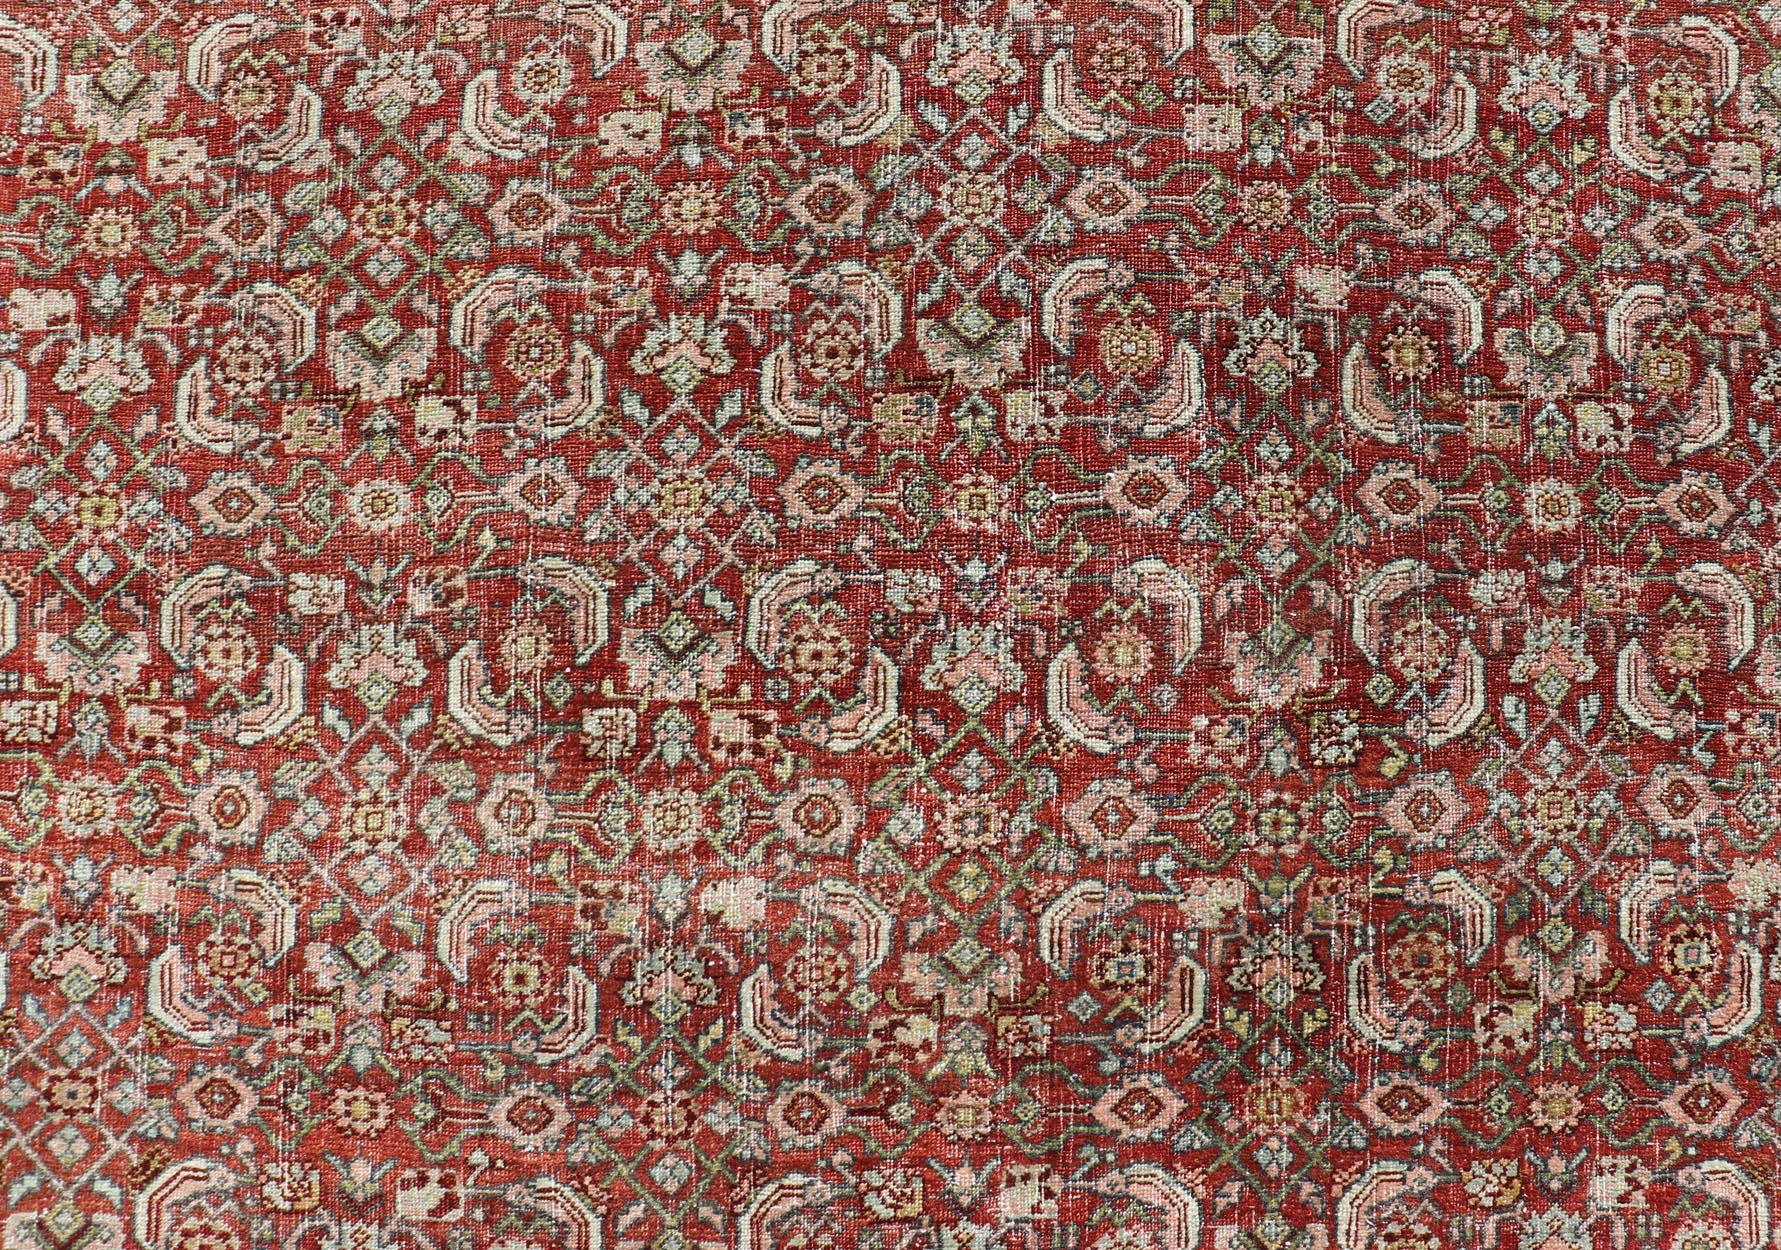 Palace Size Antique Persian Bidjar Rug in Shades of Red, Blue Grey & Lime Green For Sale 1